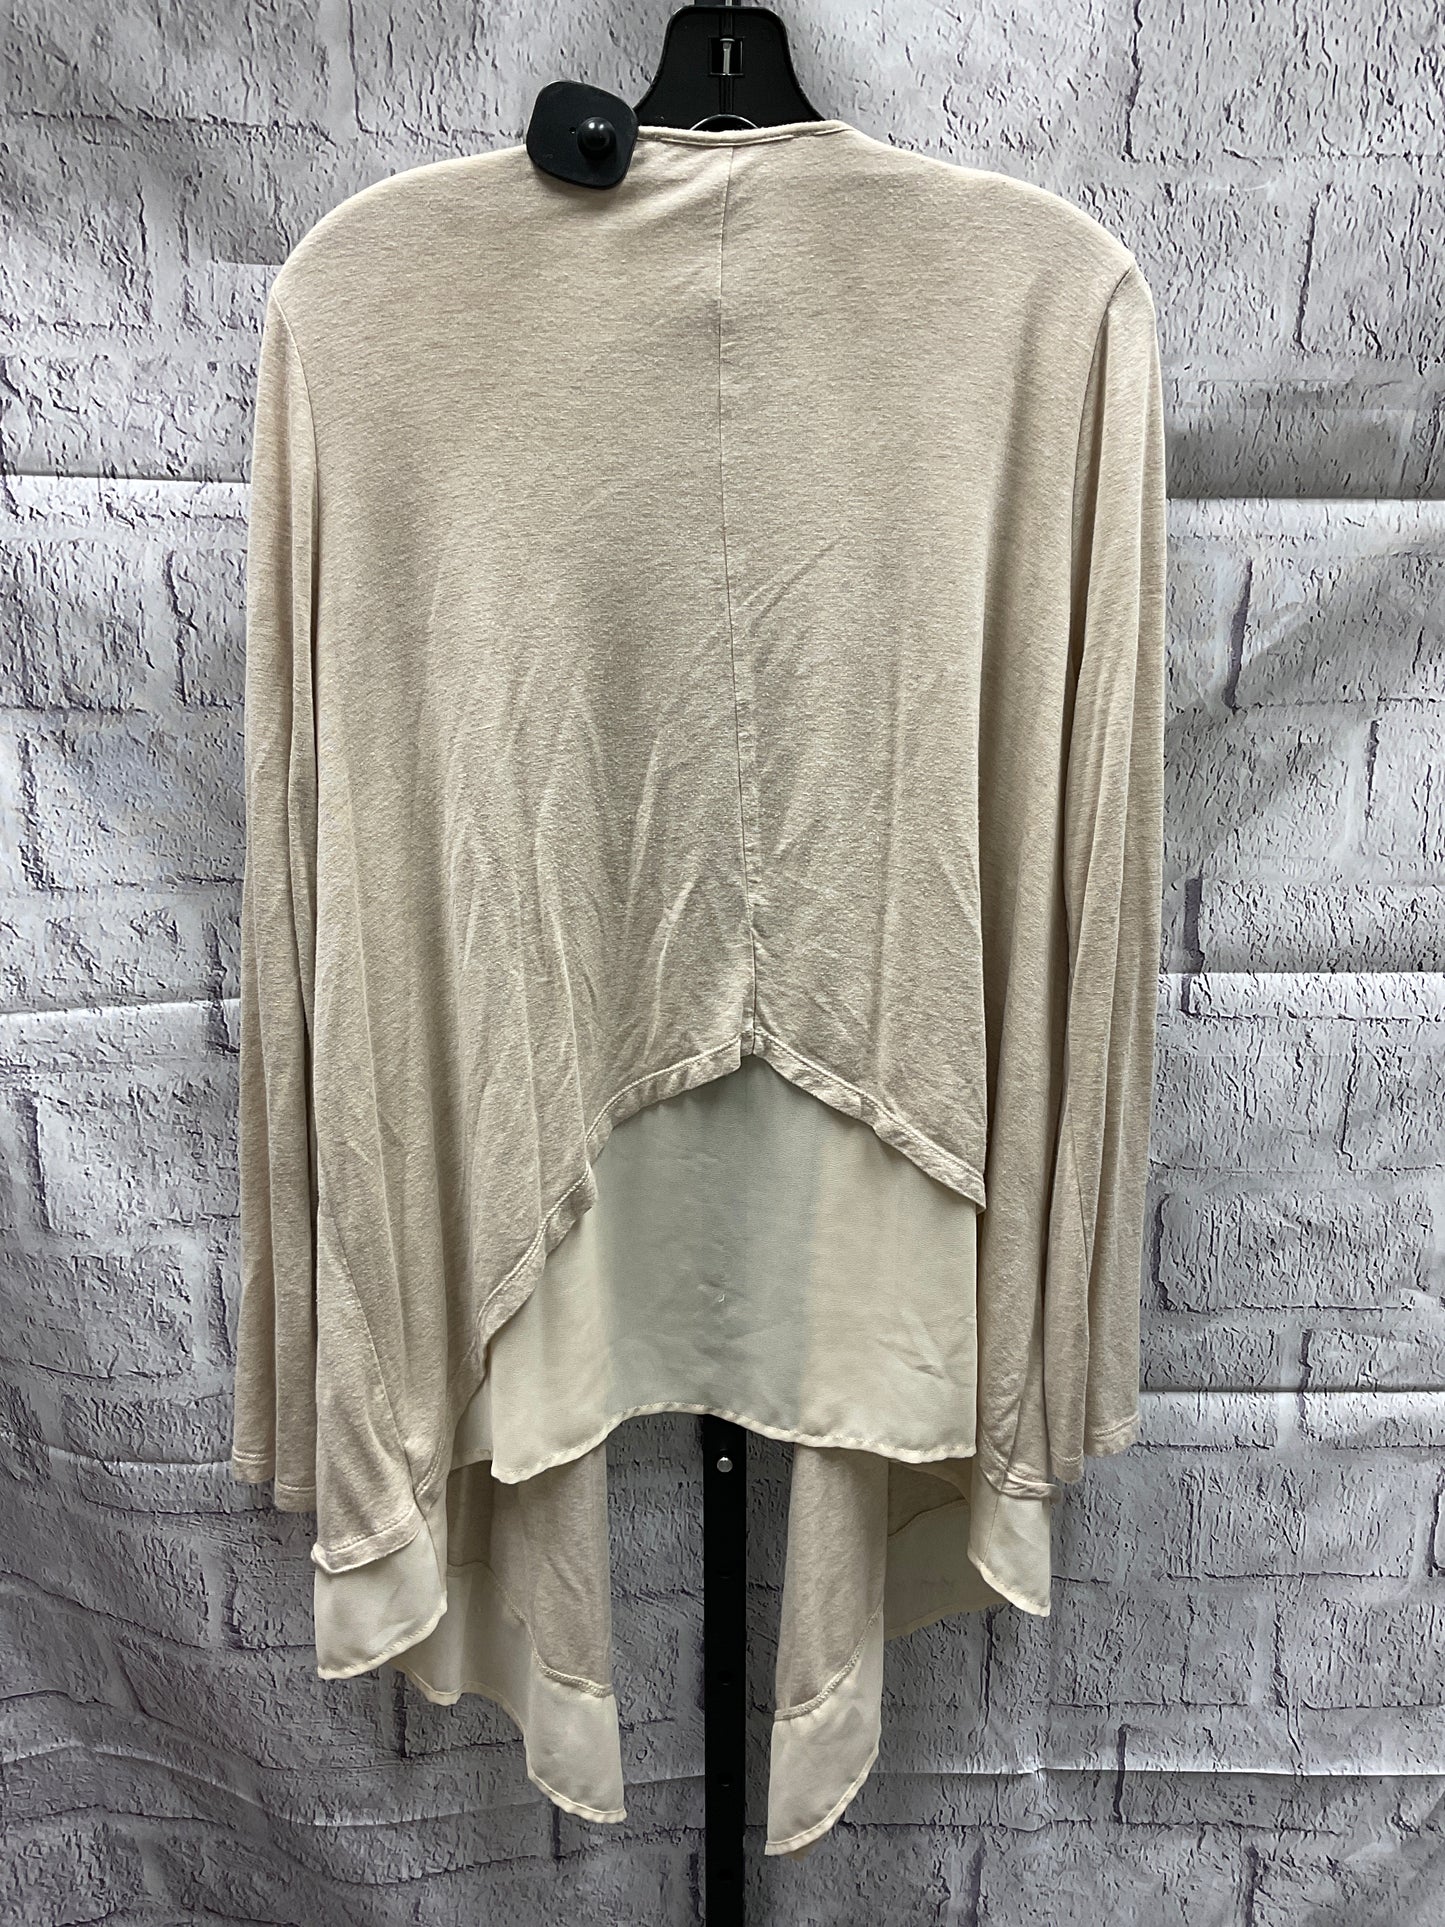 Coverup By Lane Bryant  Size: 14